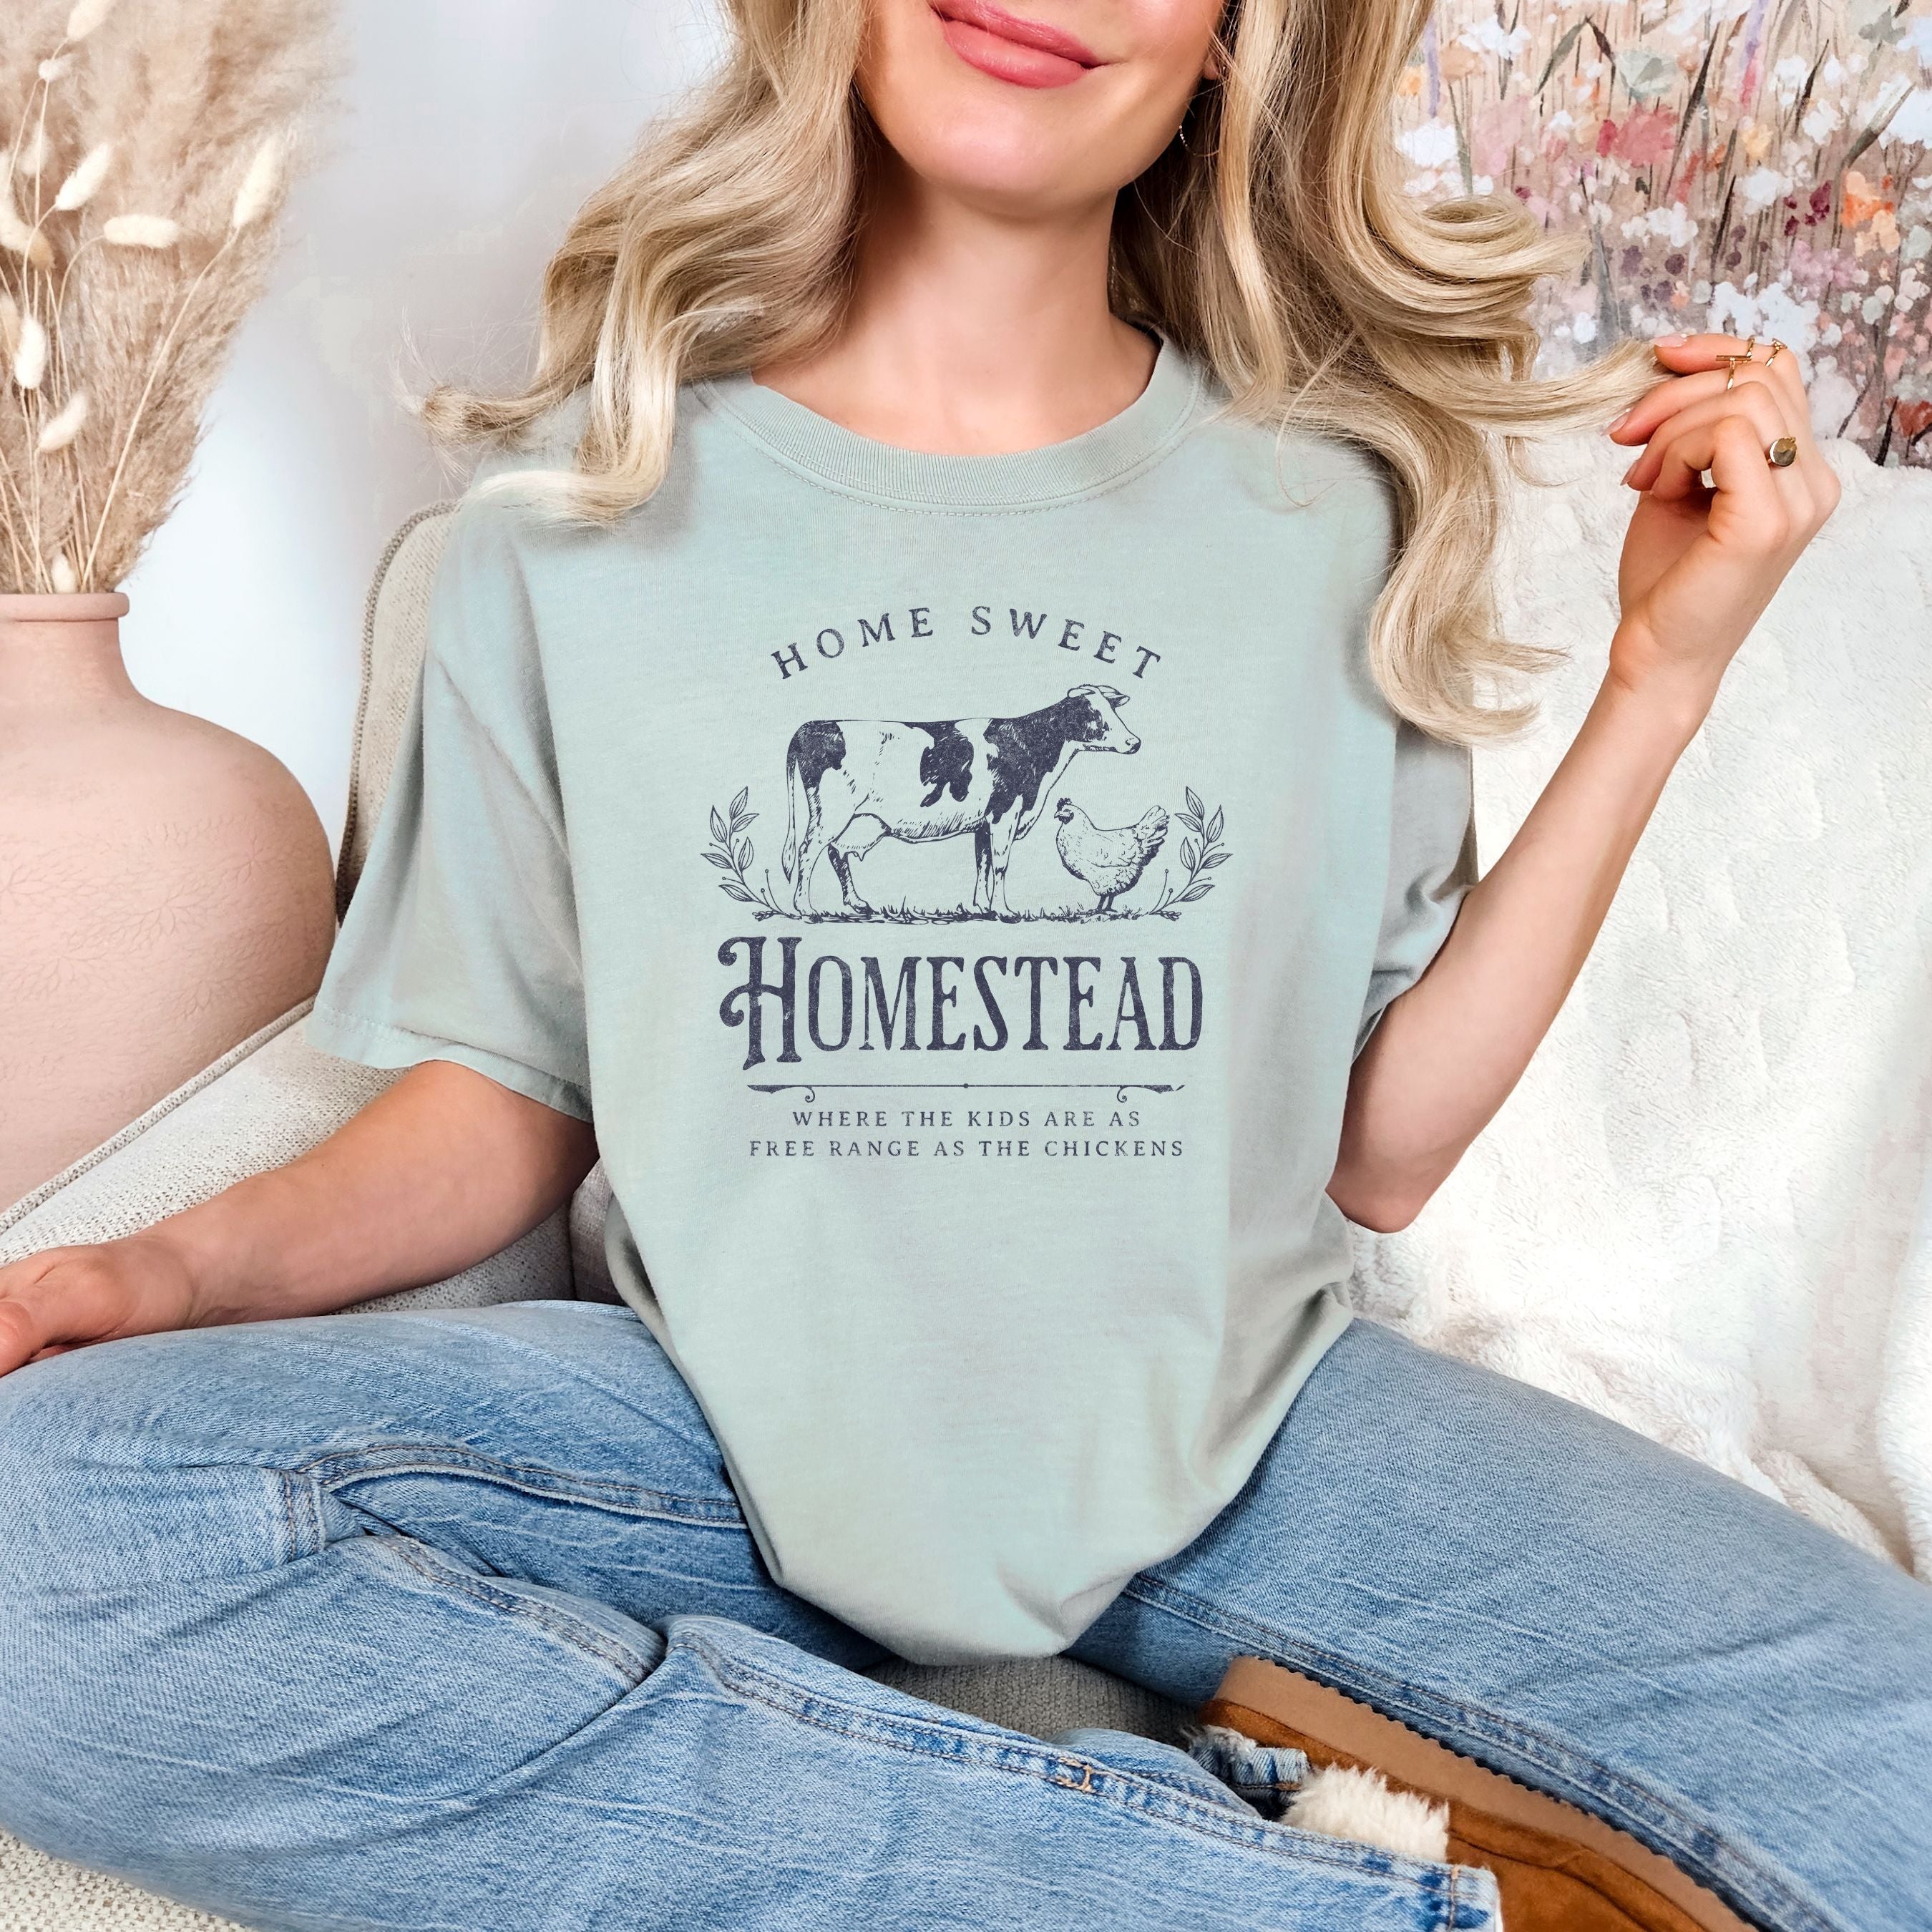 PREORDER: Home Sweet Homestead Graphic Tee (Ships Late May)